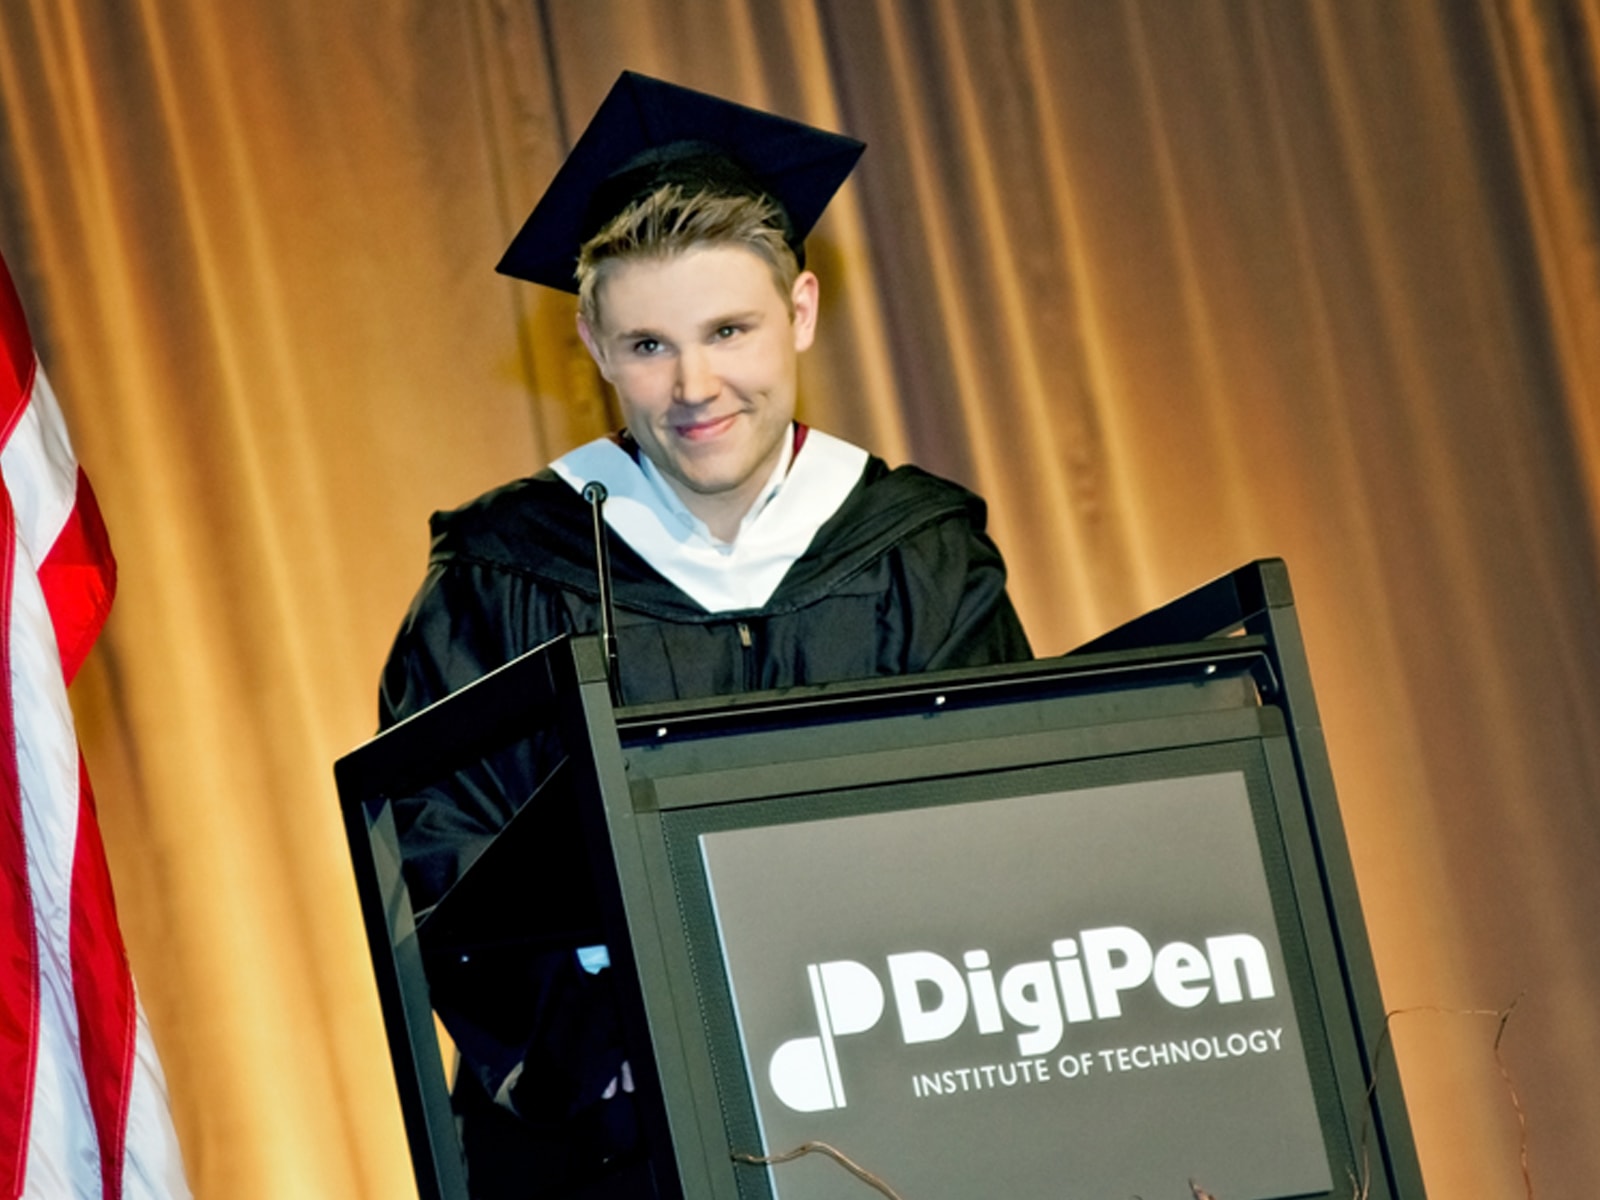 DigiPen graduate Kevin French speaking at the podium at the 2013 commencement ceremony